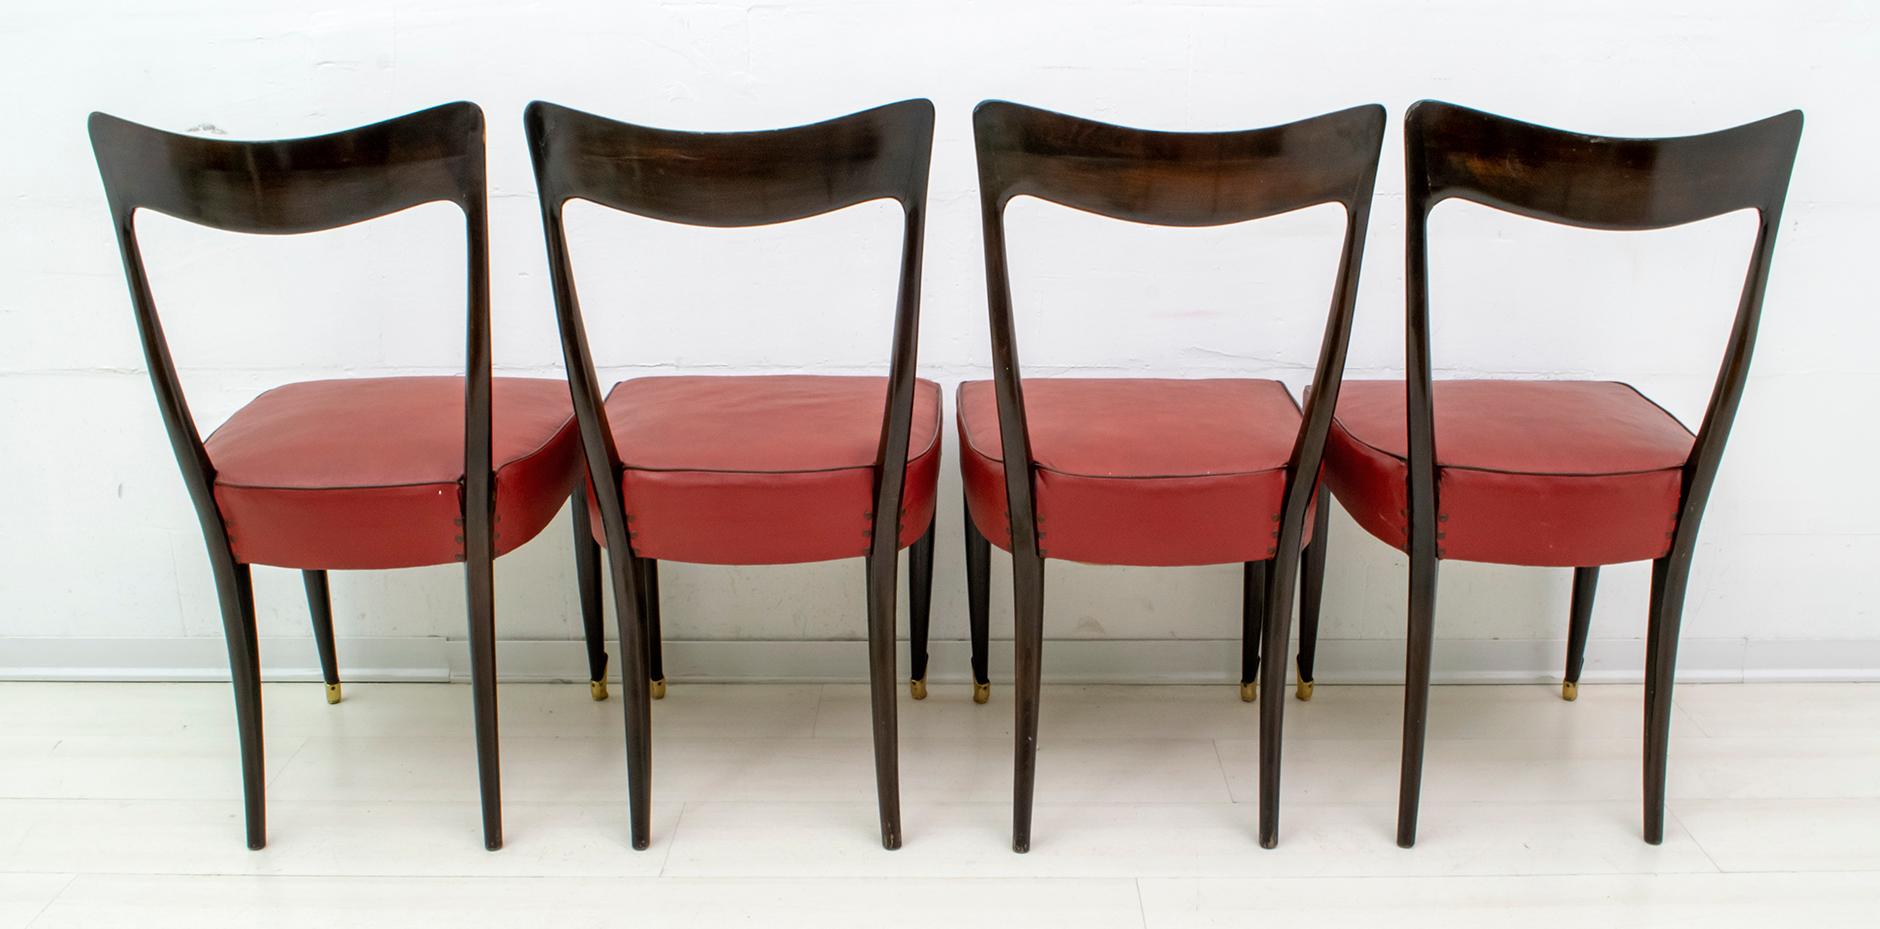 Faux Leather Guglielmo Ulrich Mid-Century Modern Italian Mahogany Four Dining Chairs, 1940s